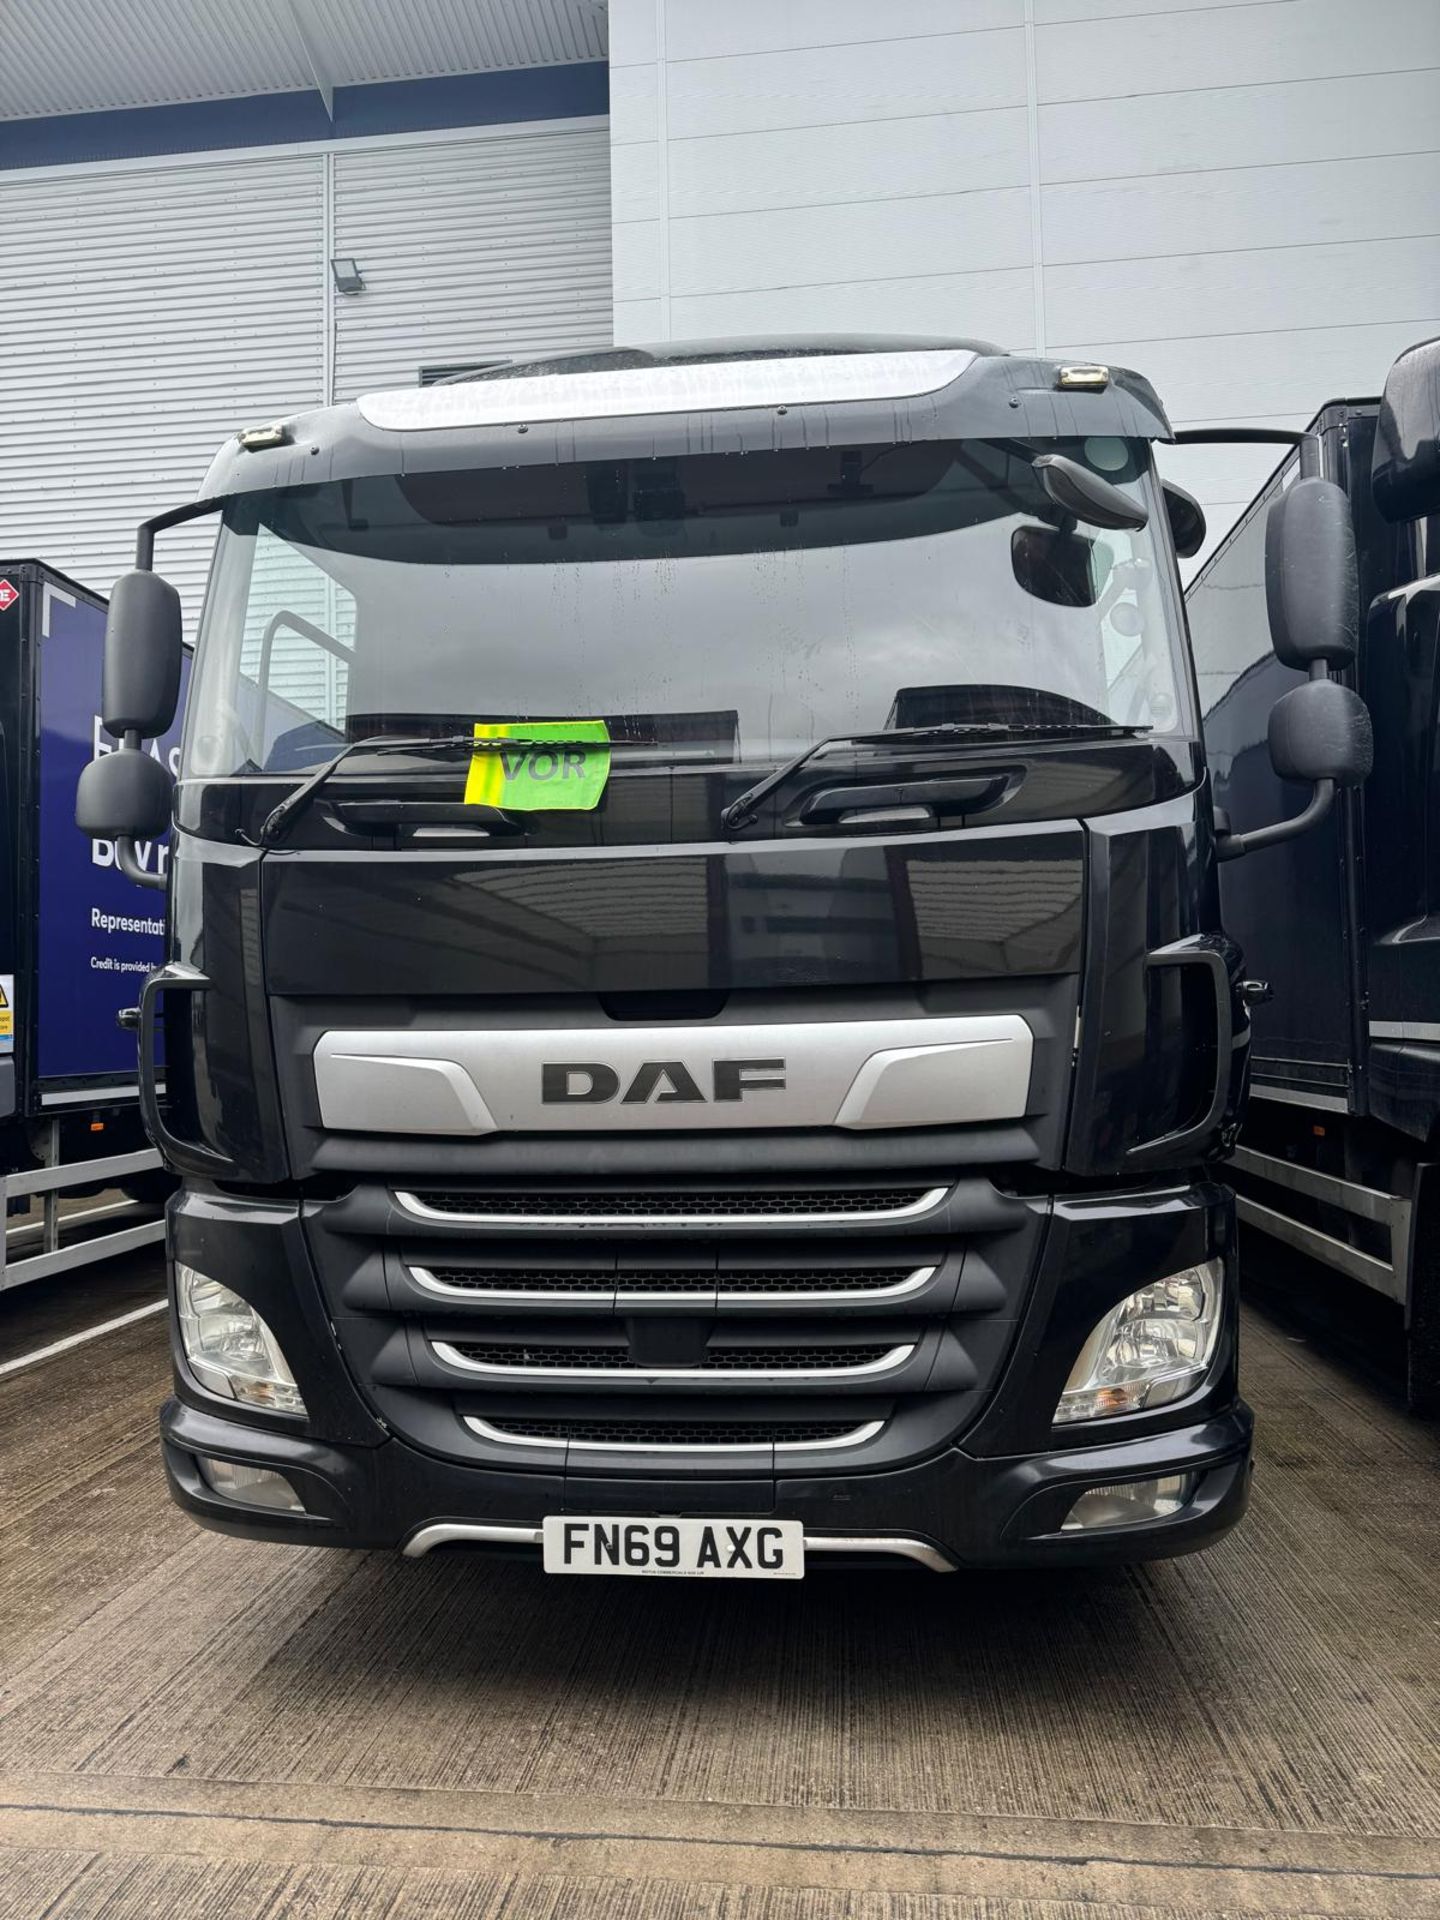 2019, DAF CF 260 FA (Ex-Fleet Owned & Maintained) - FN69 AXG (18 Ton Rigid Truck with Tail Lift) - Image 2 of 7